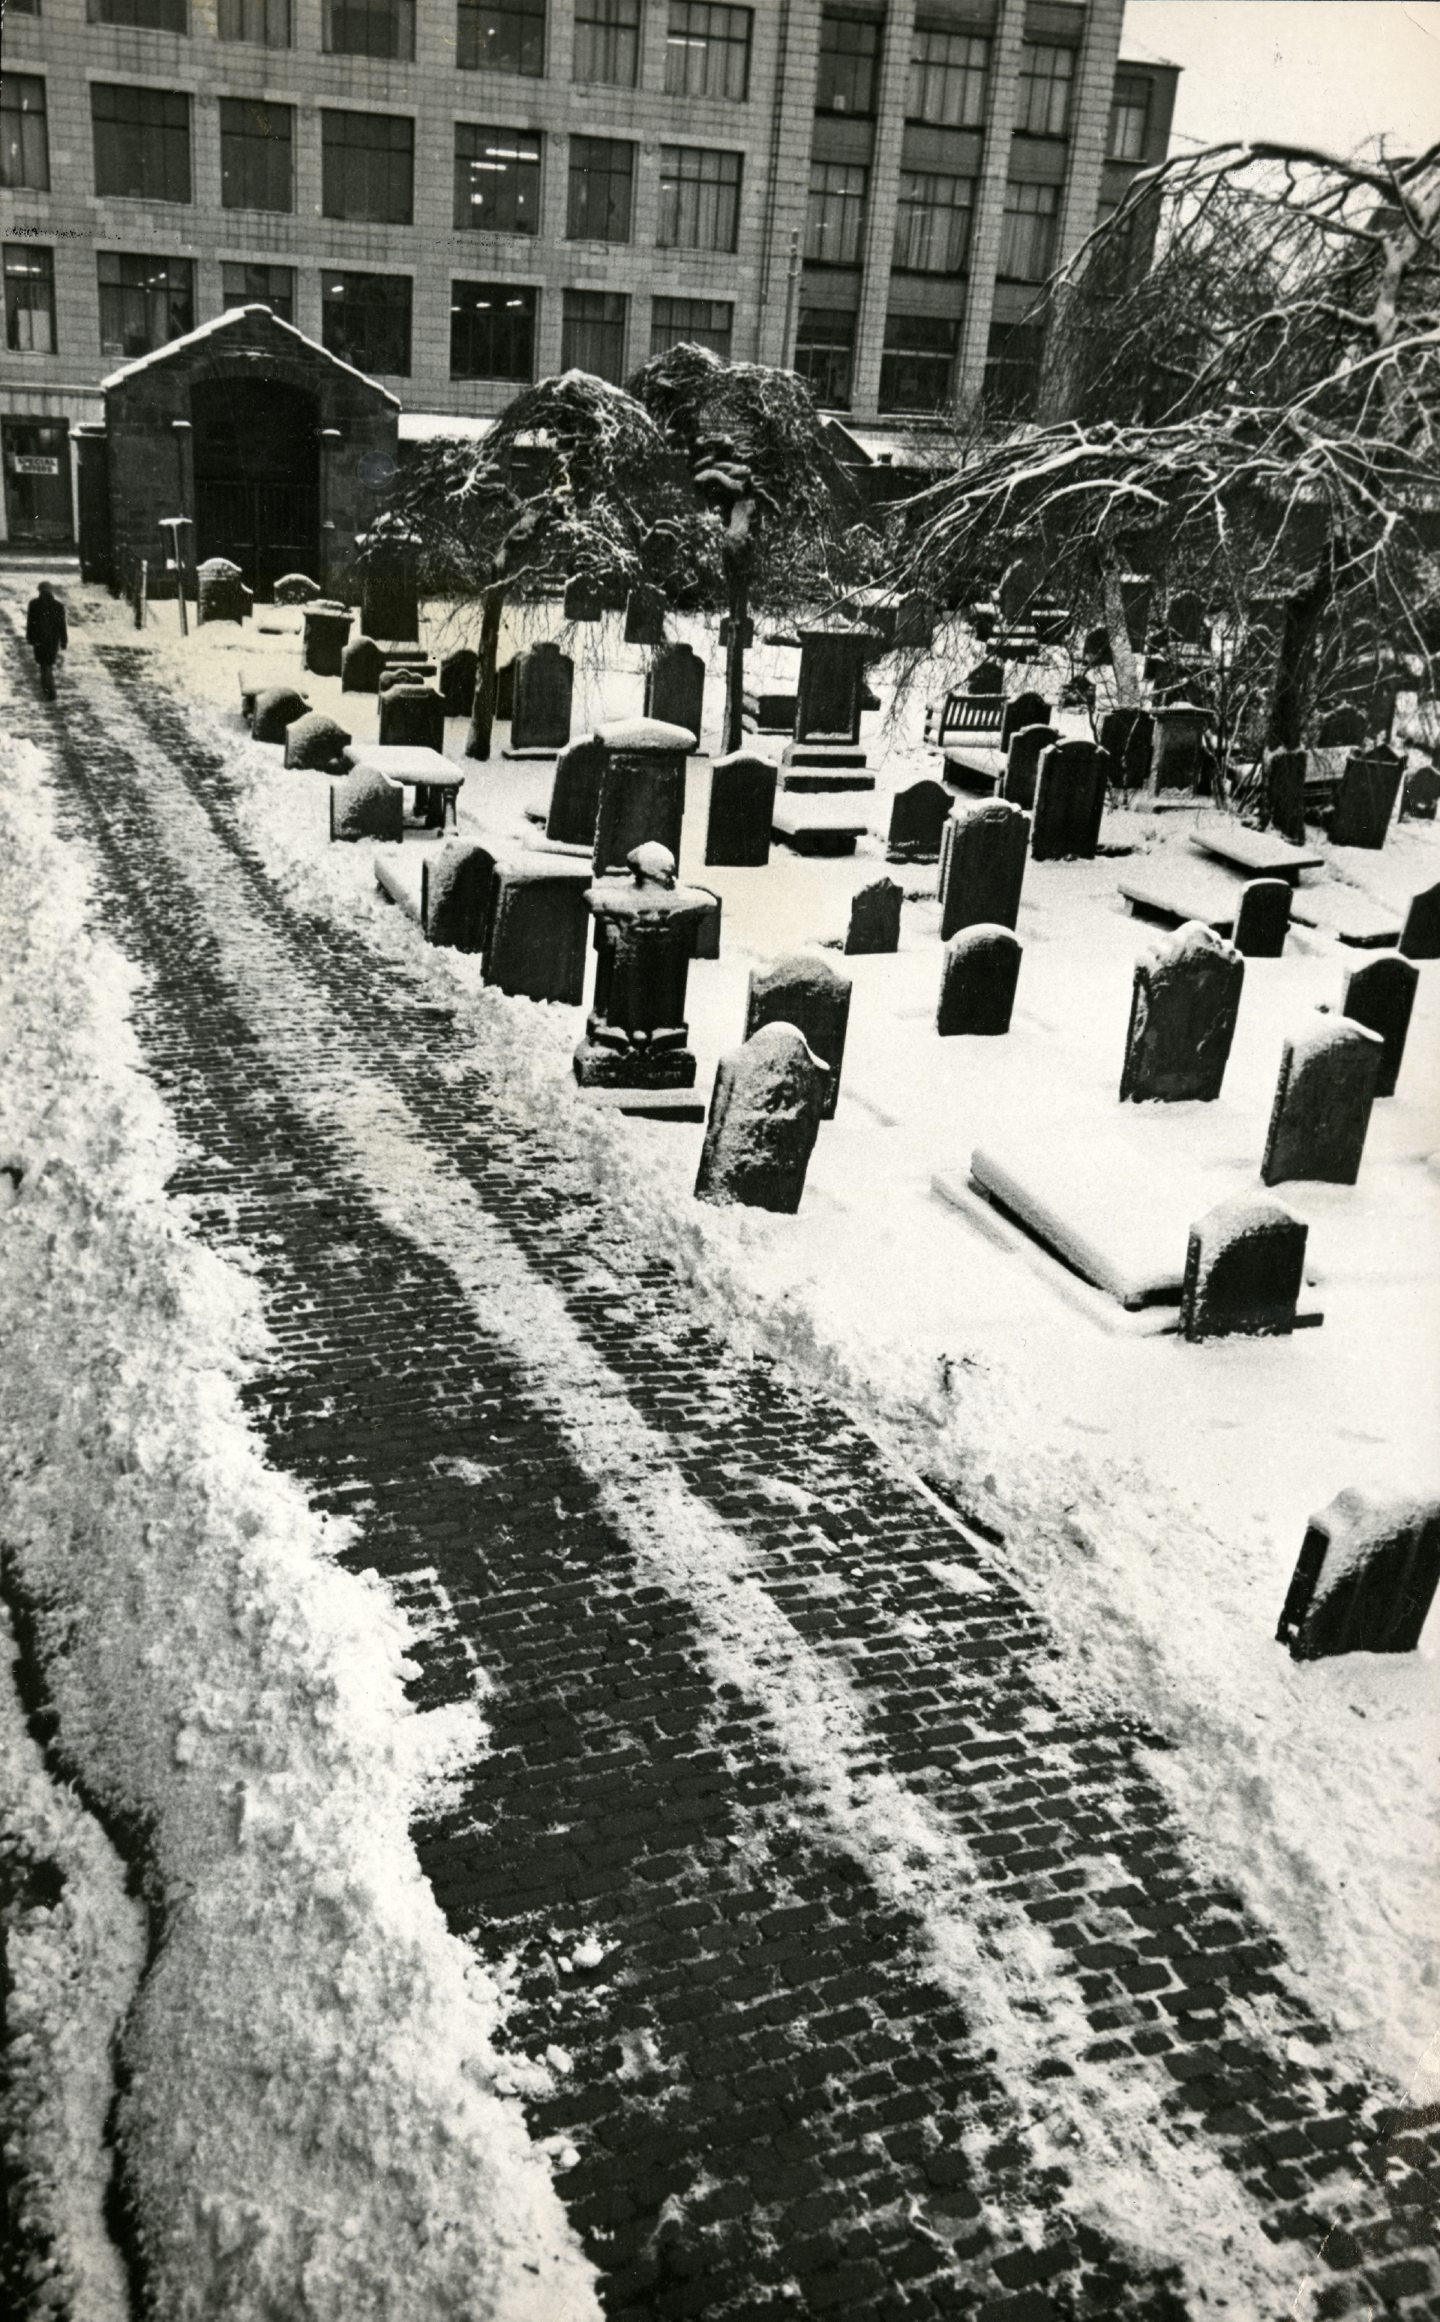 Snow in Dundee in 1984.